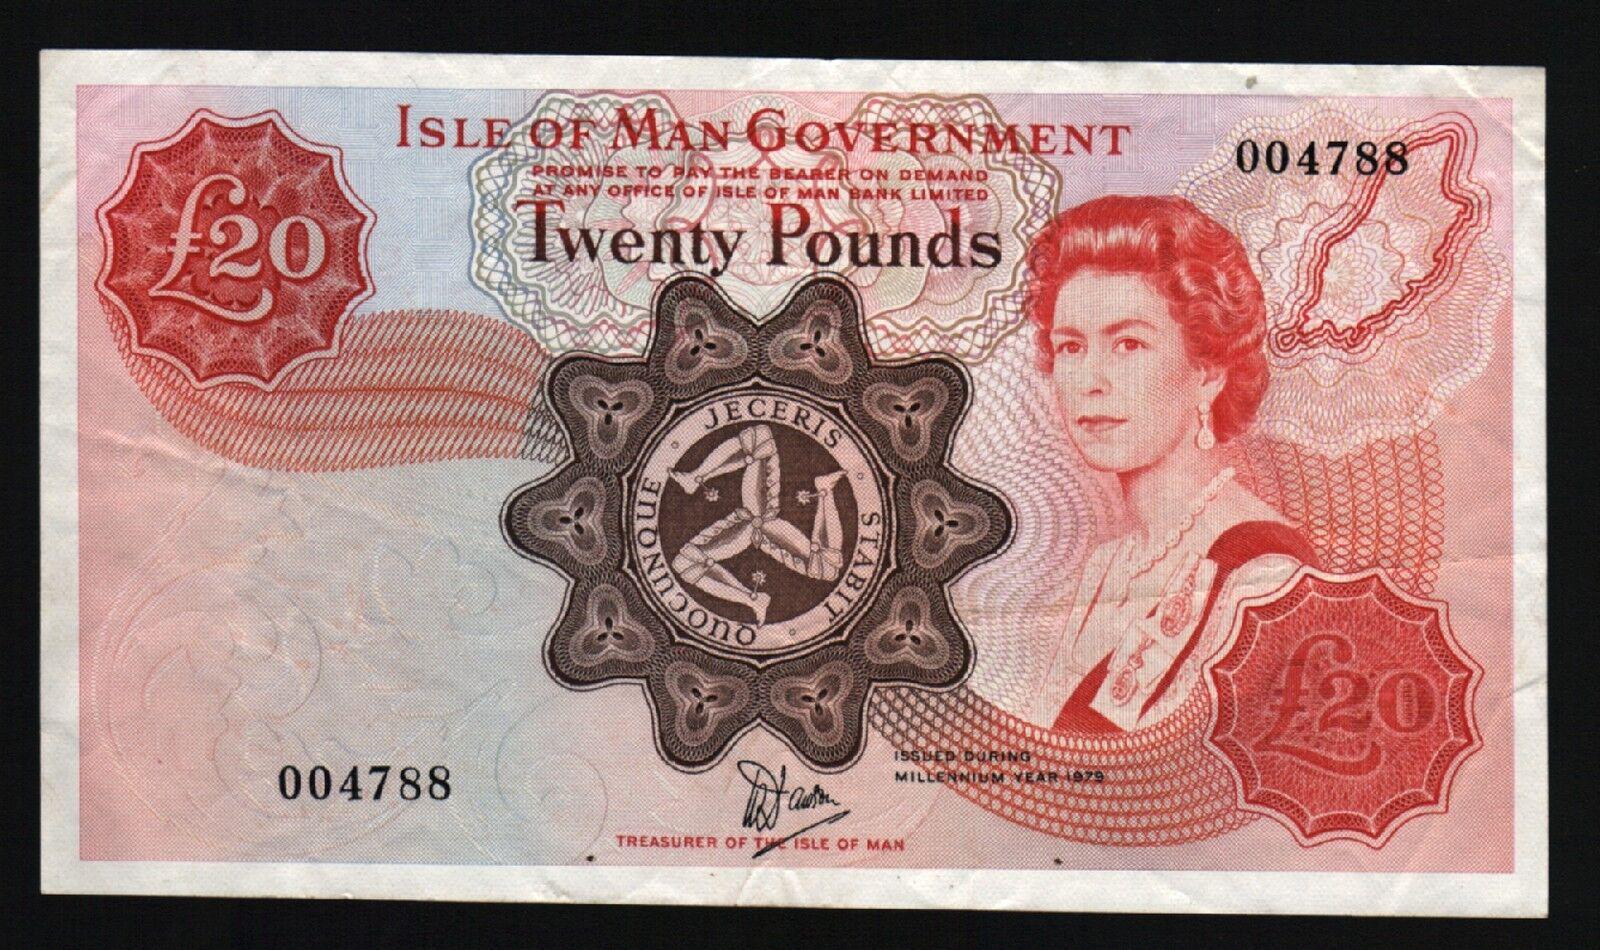 ISLE OF MAN 20 POUNDS P32 1979 - WorldCurrency